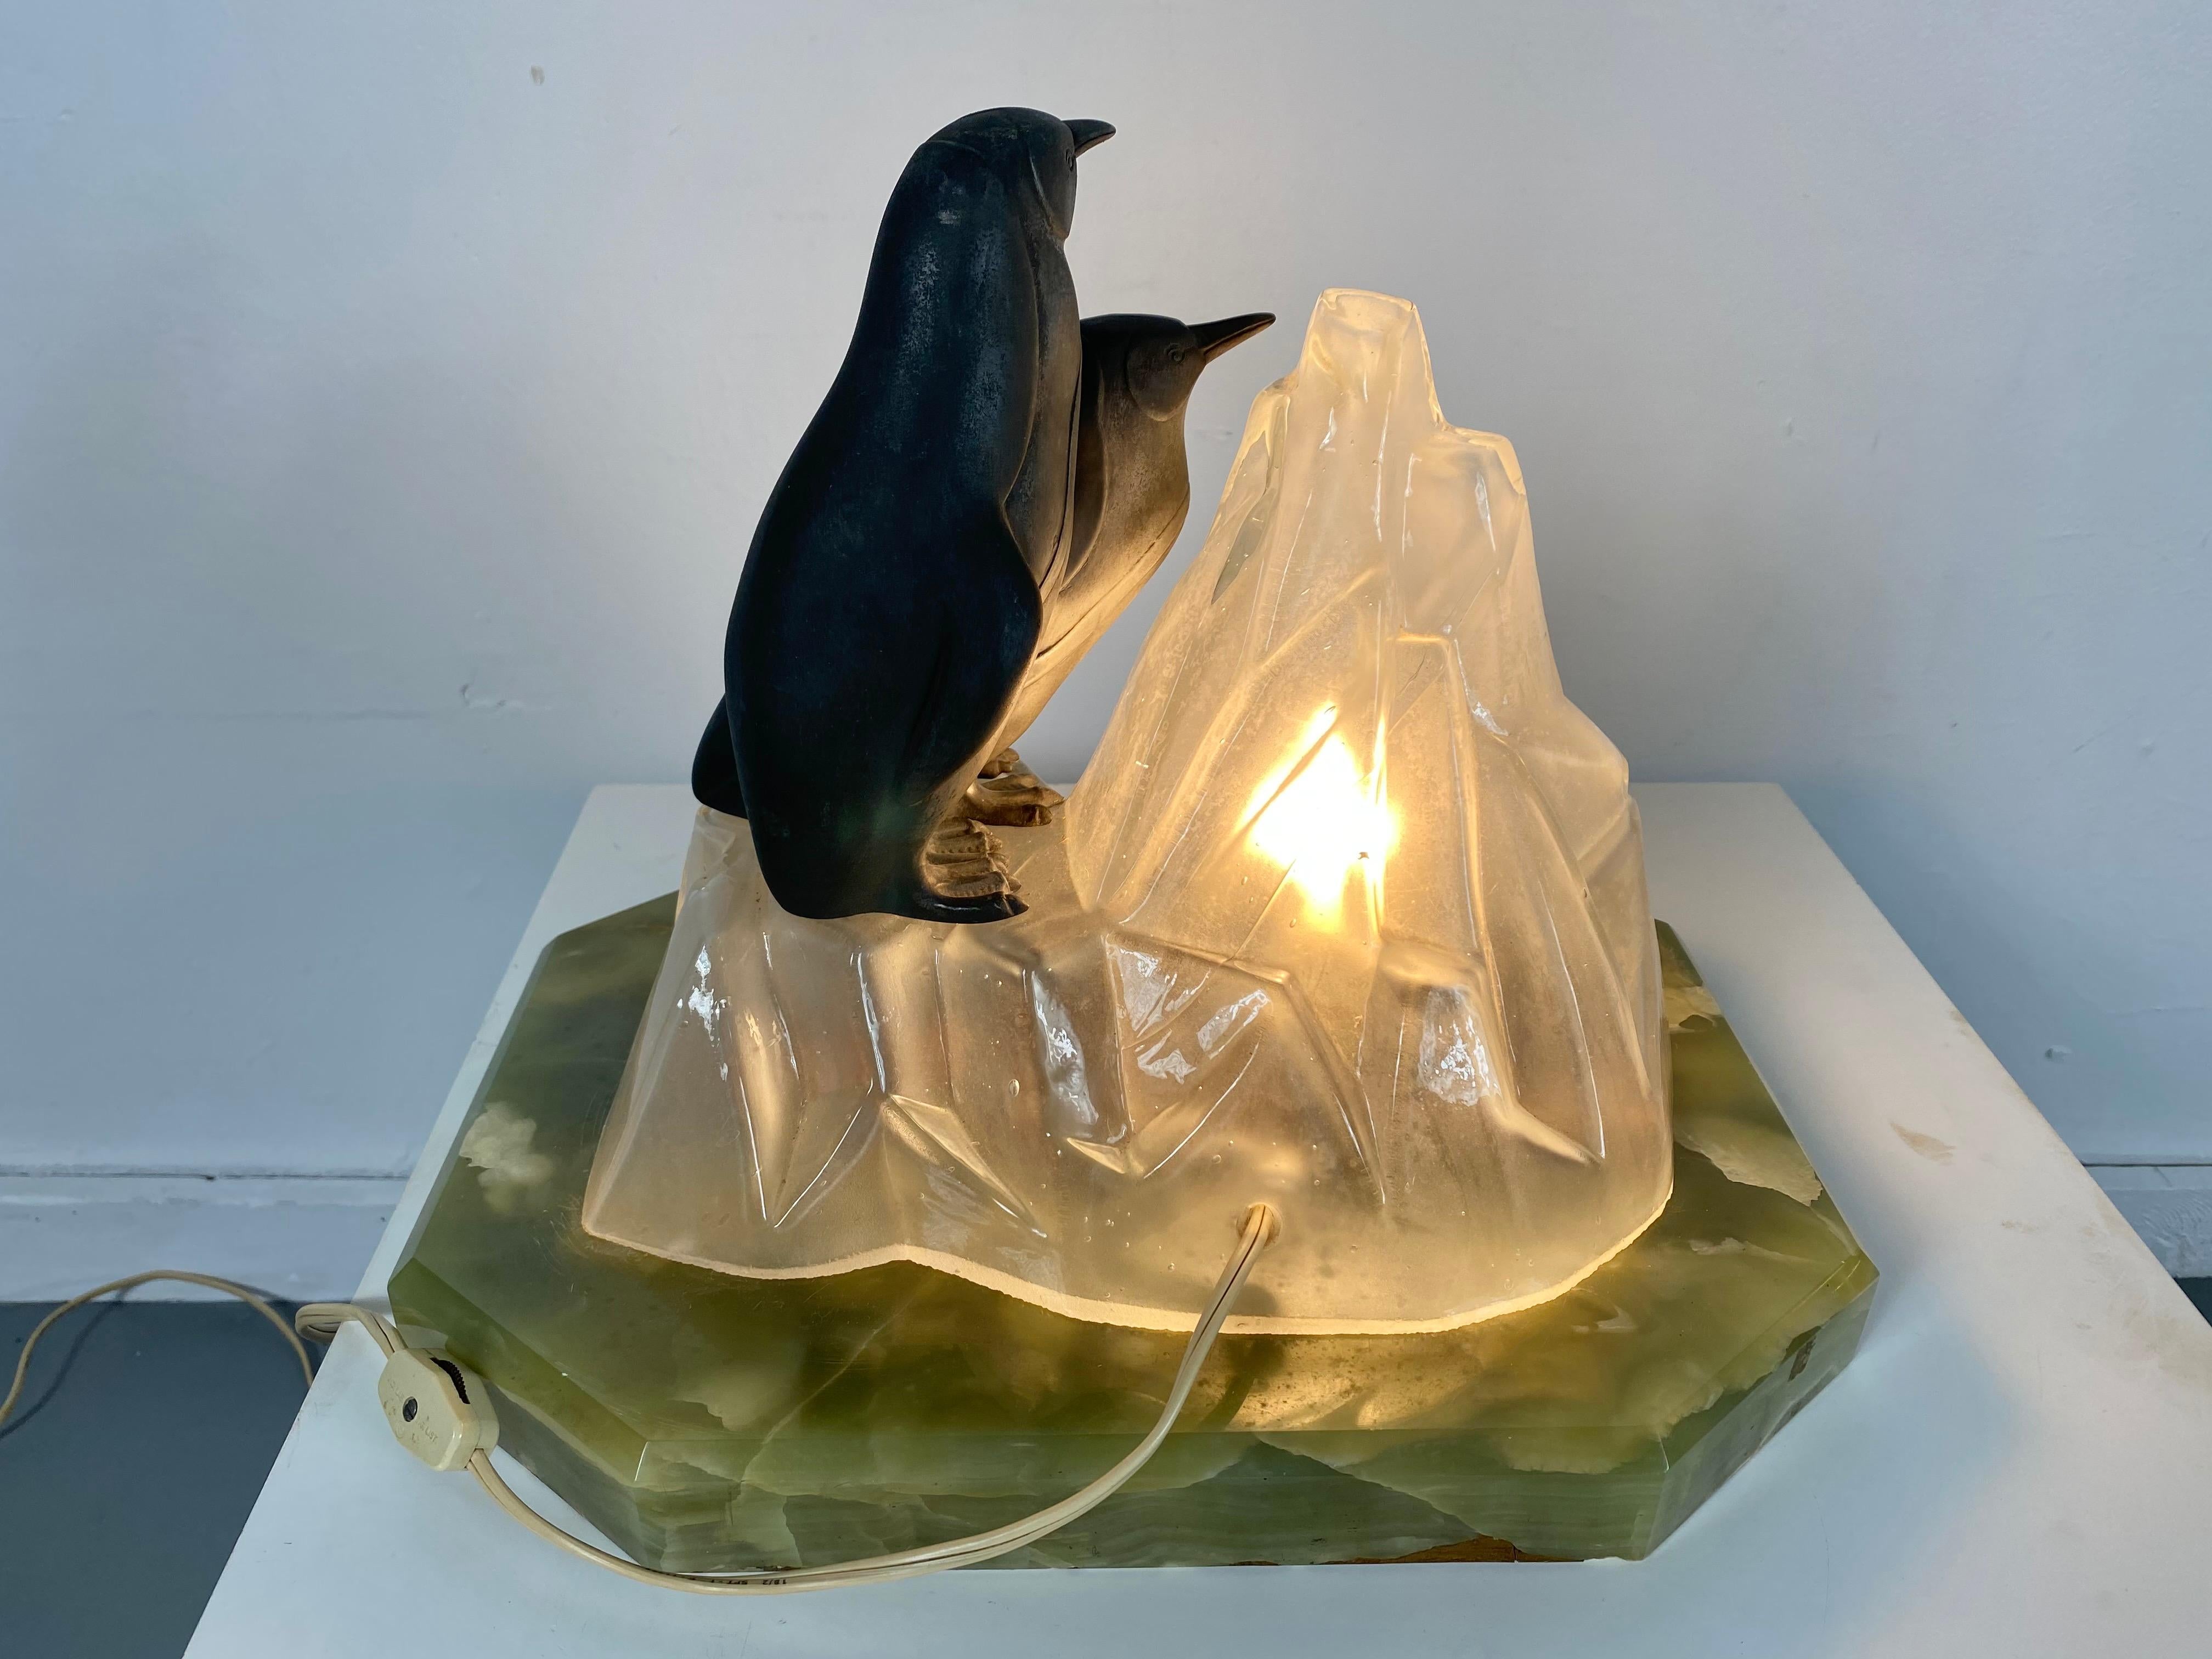 American Unusual, Stylized Art Deco Penguin's and Glass Ice Glacier Table Lamp